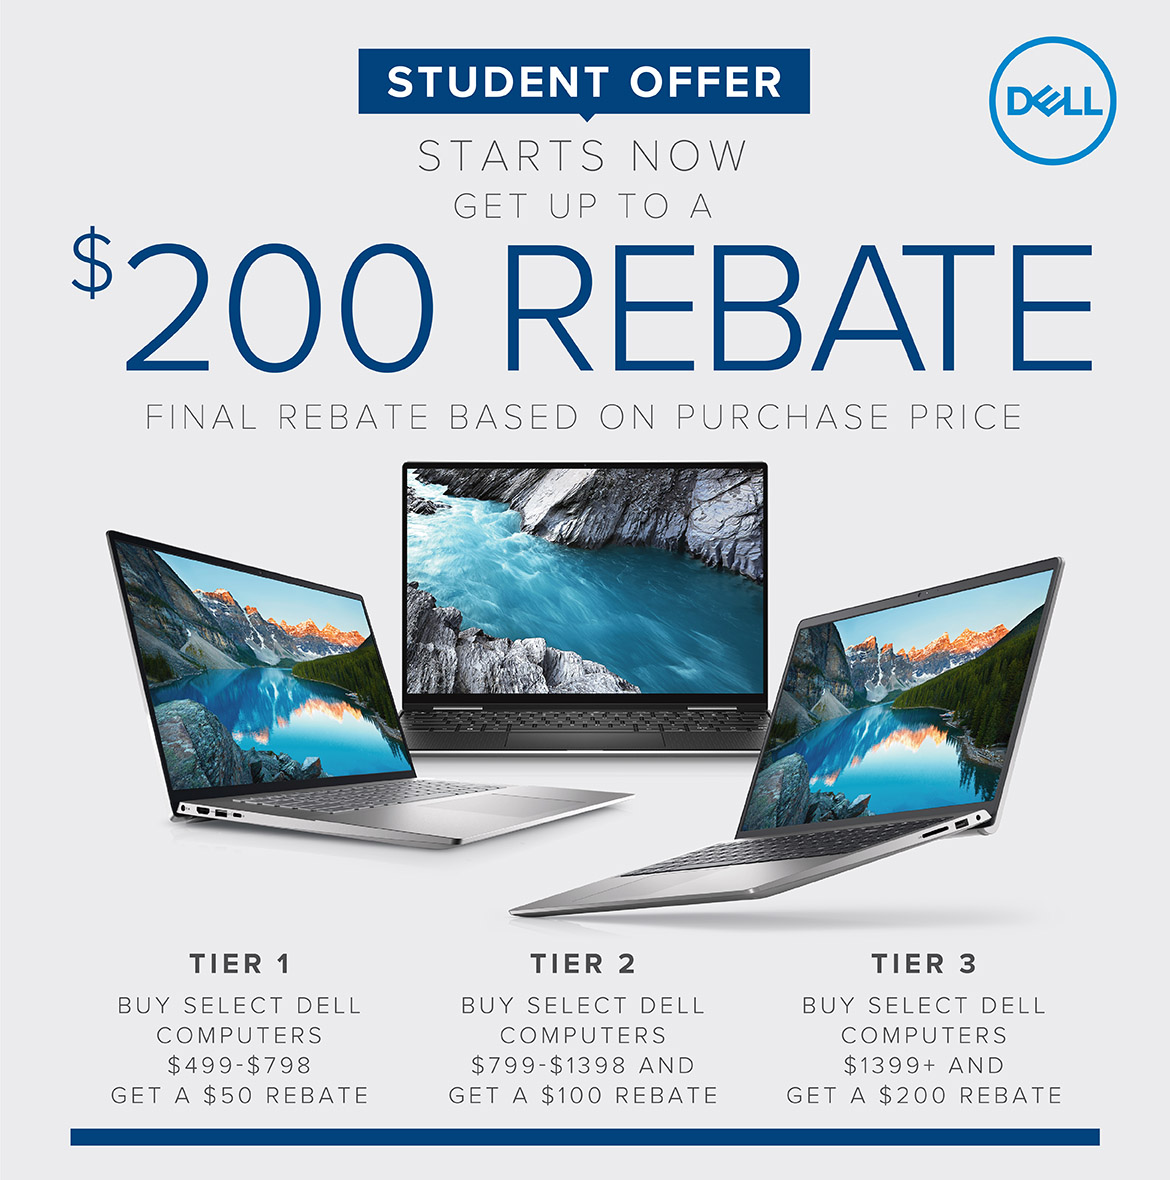 Student Offer Starts Now! Get Up to A $200 Rebate! Final Rebate Based on Purchase Price. 